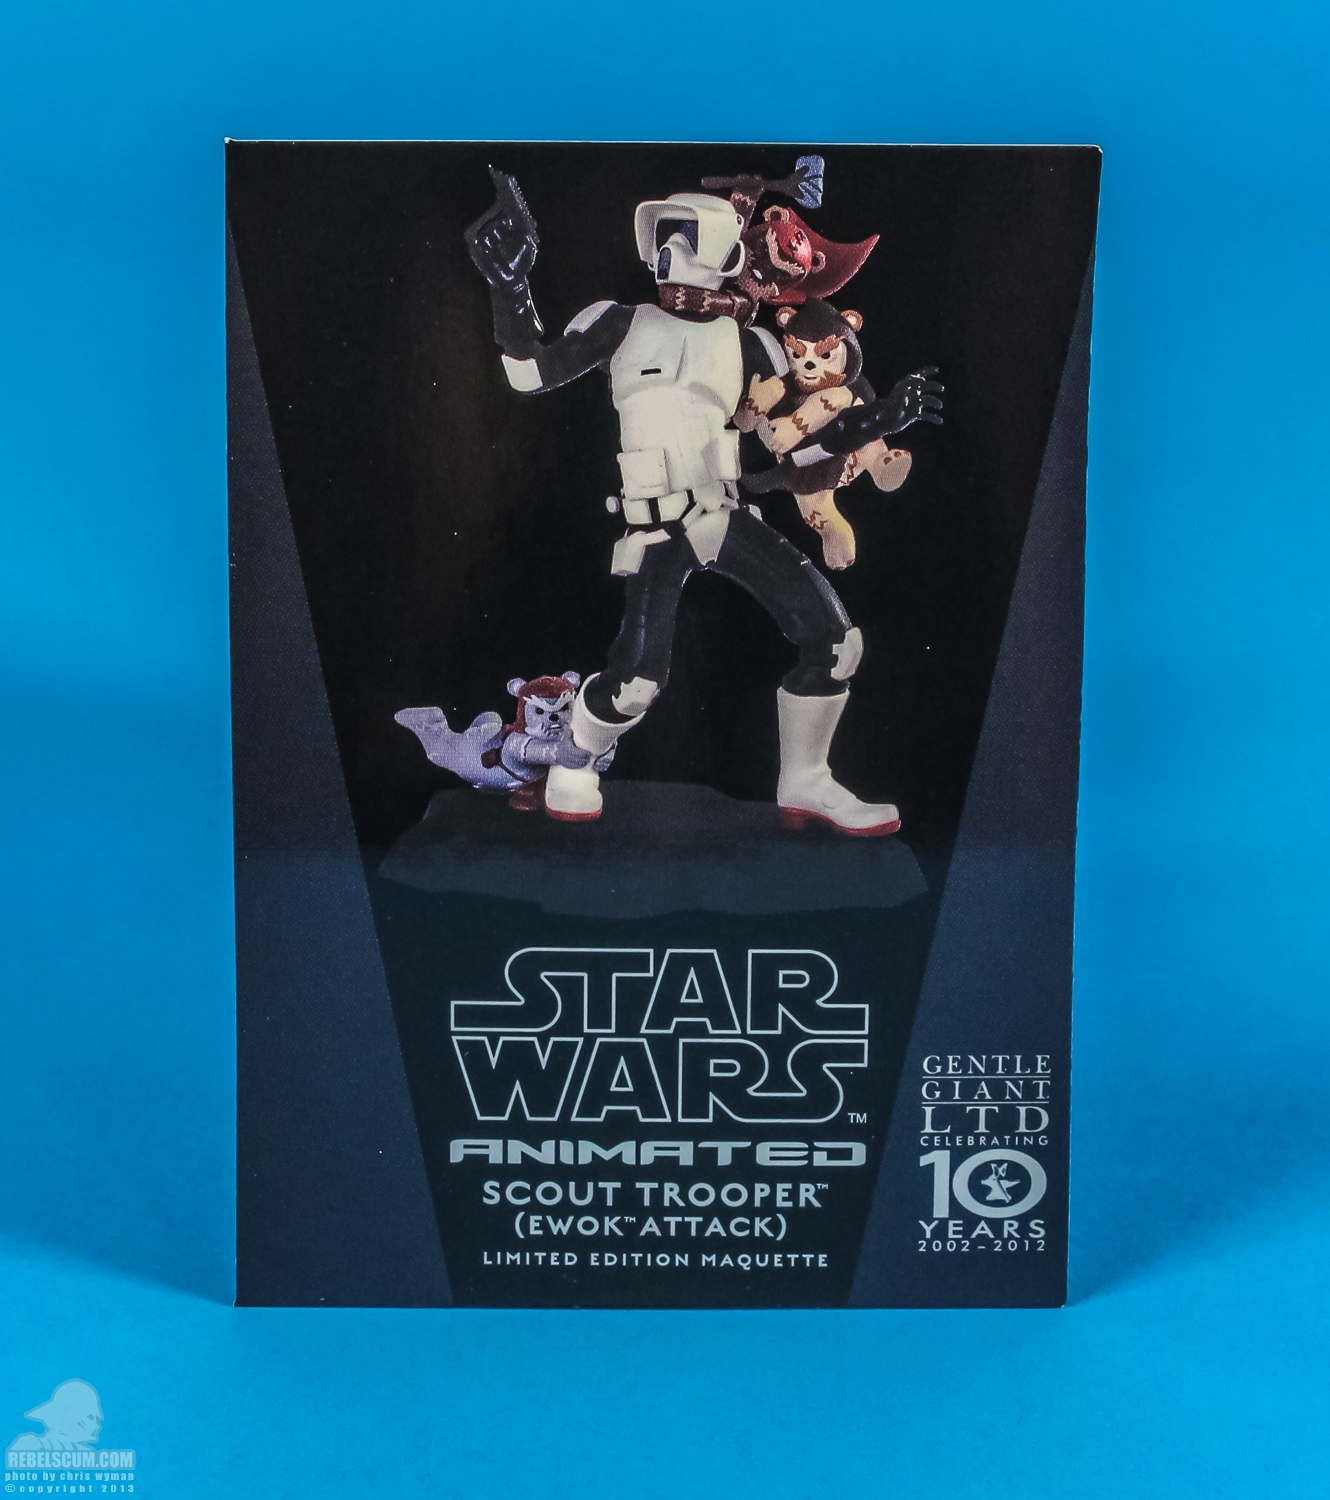 Scout_Trooper_Ewok Attack_Animated_Maquette_Gentle_Giant_Ltd-18.jpg